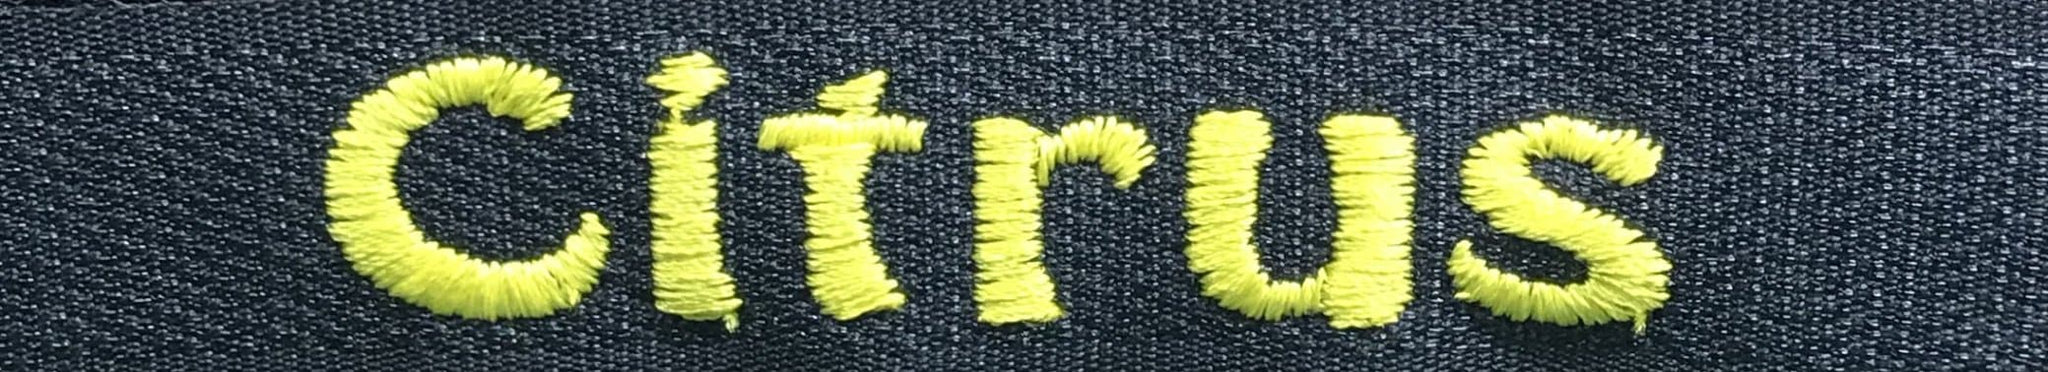 example of embroidery in citrus color